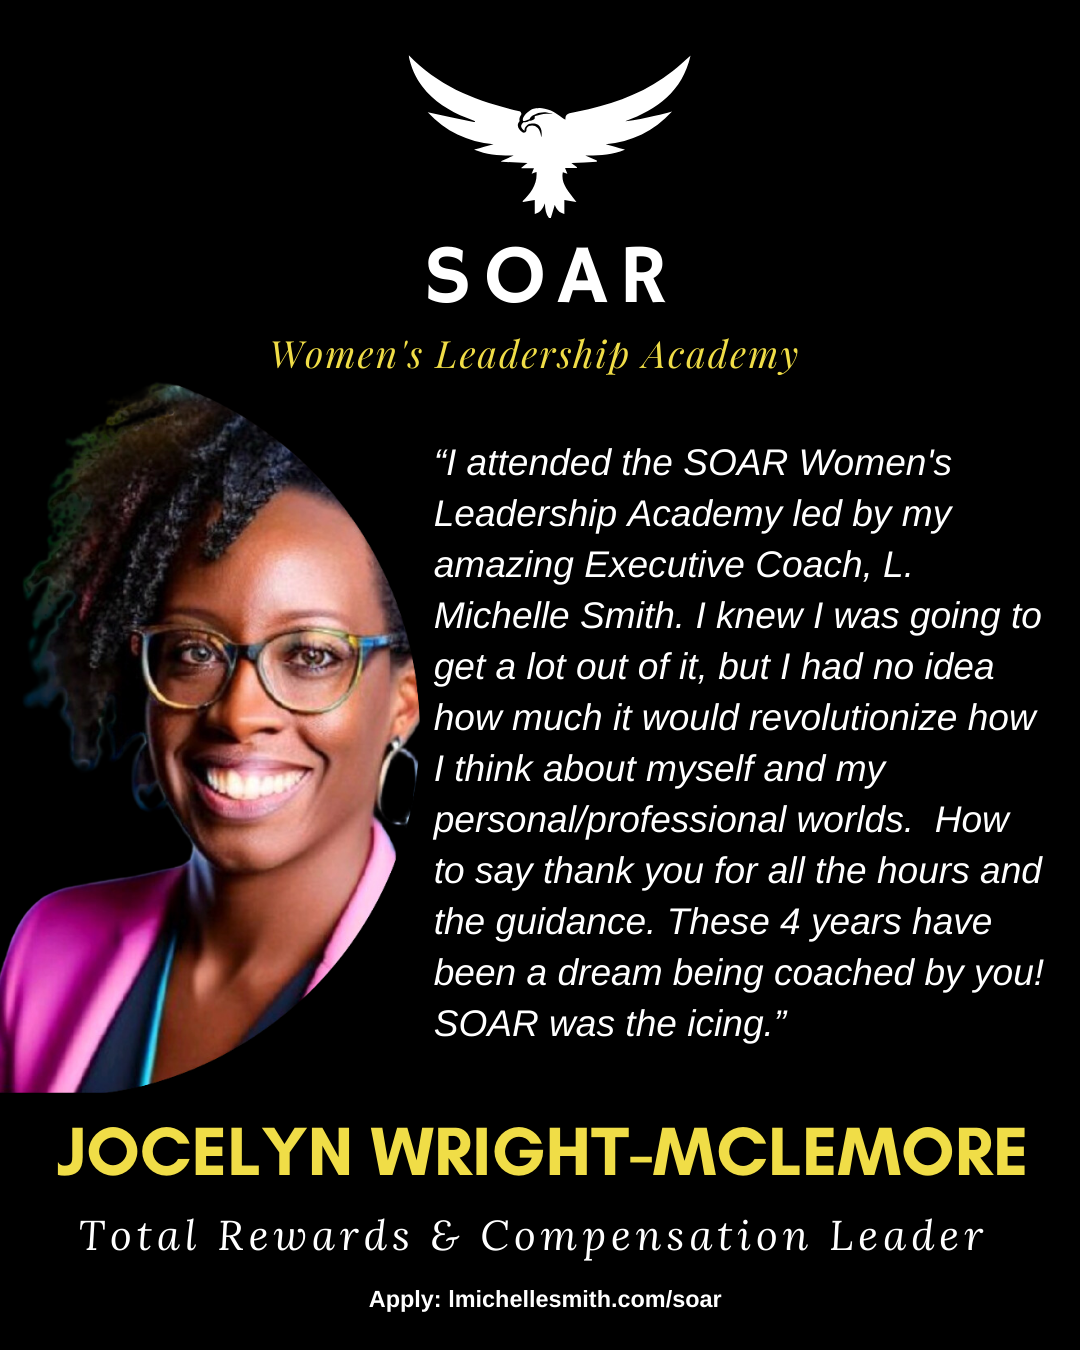 How SOAR Women’s Leadership Academy changed things for this executive 👠